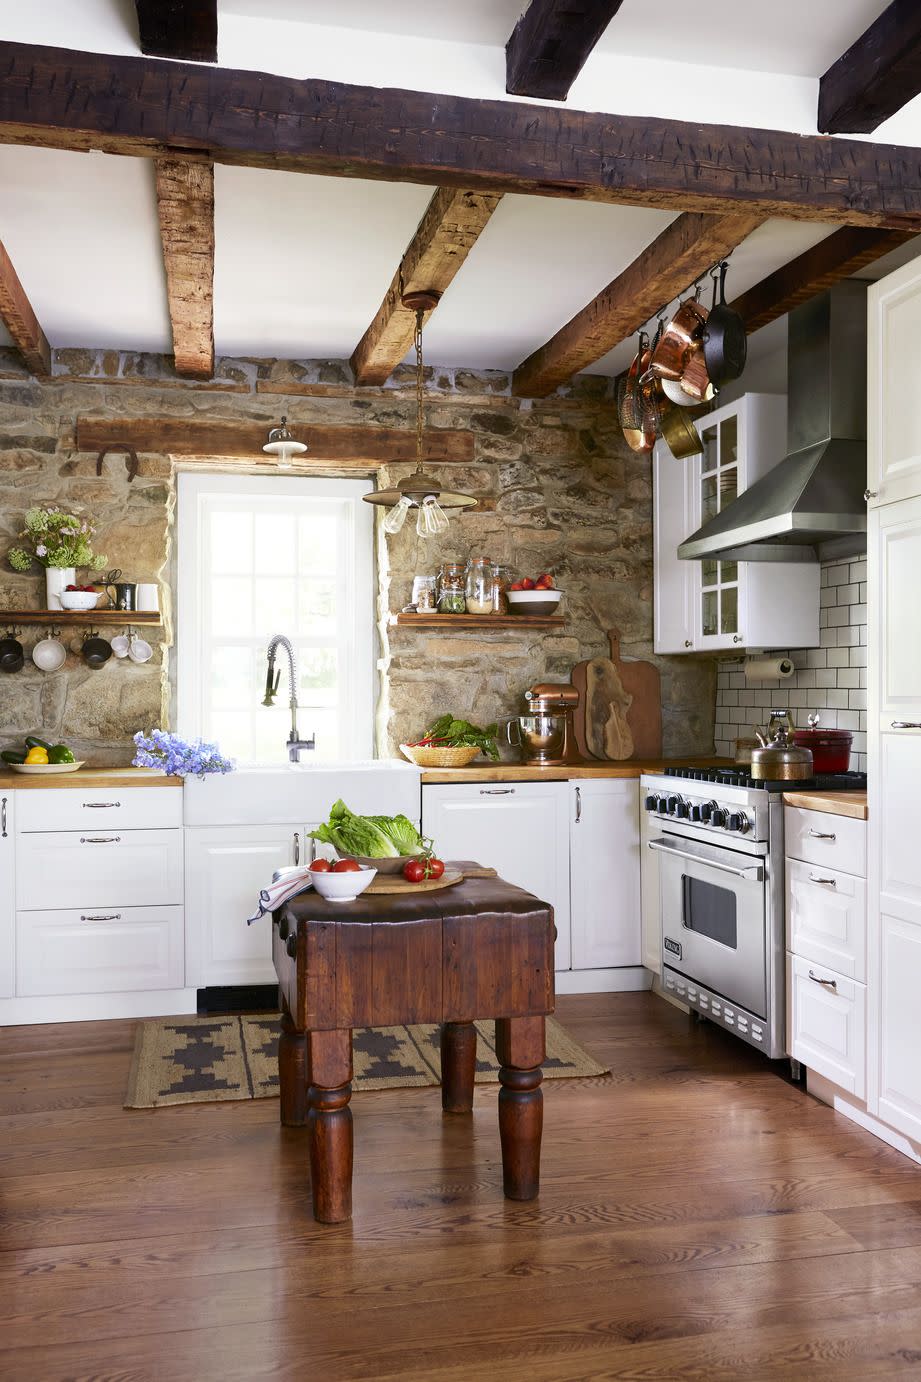 1730s stone house in long valley, new jersey homeowners petra ivanov and husband andrej kitchen